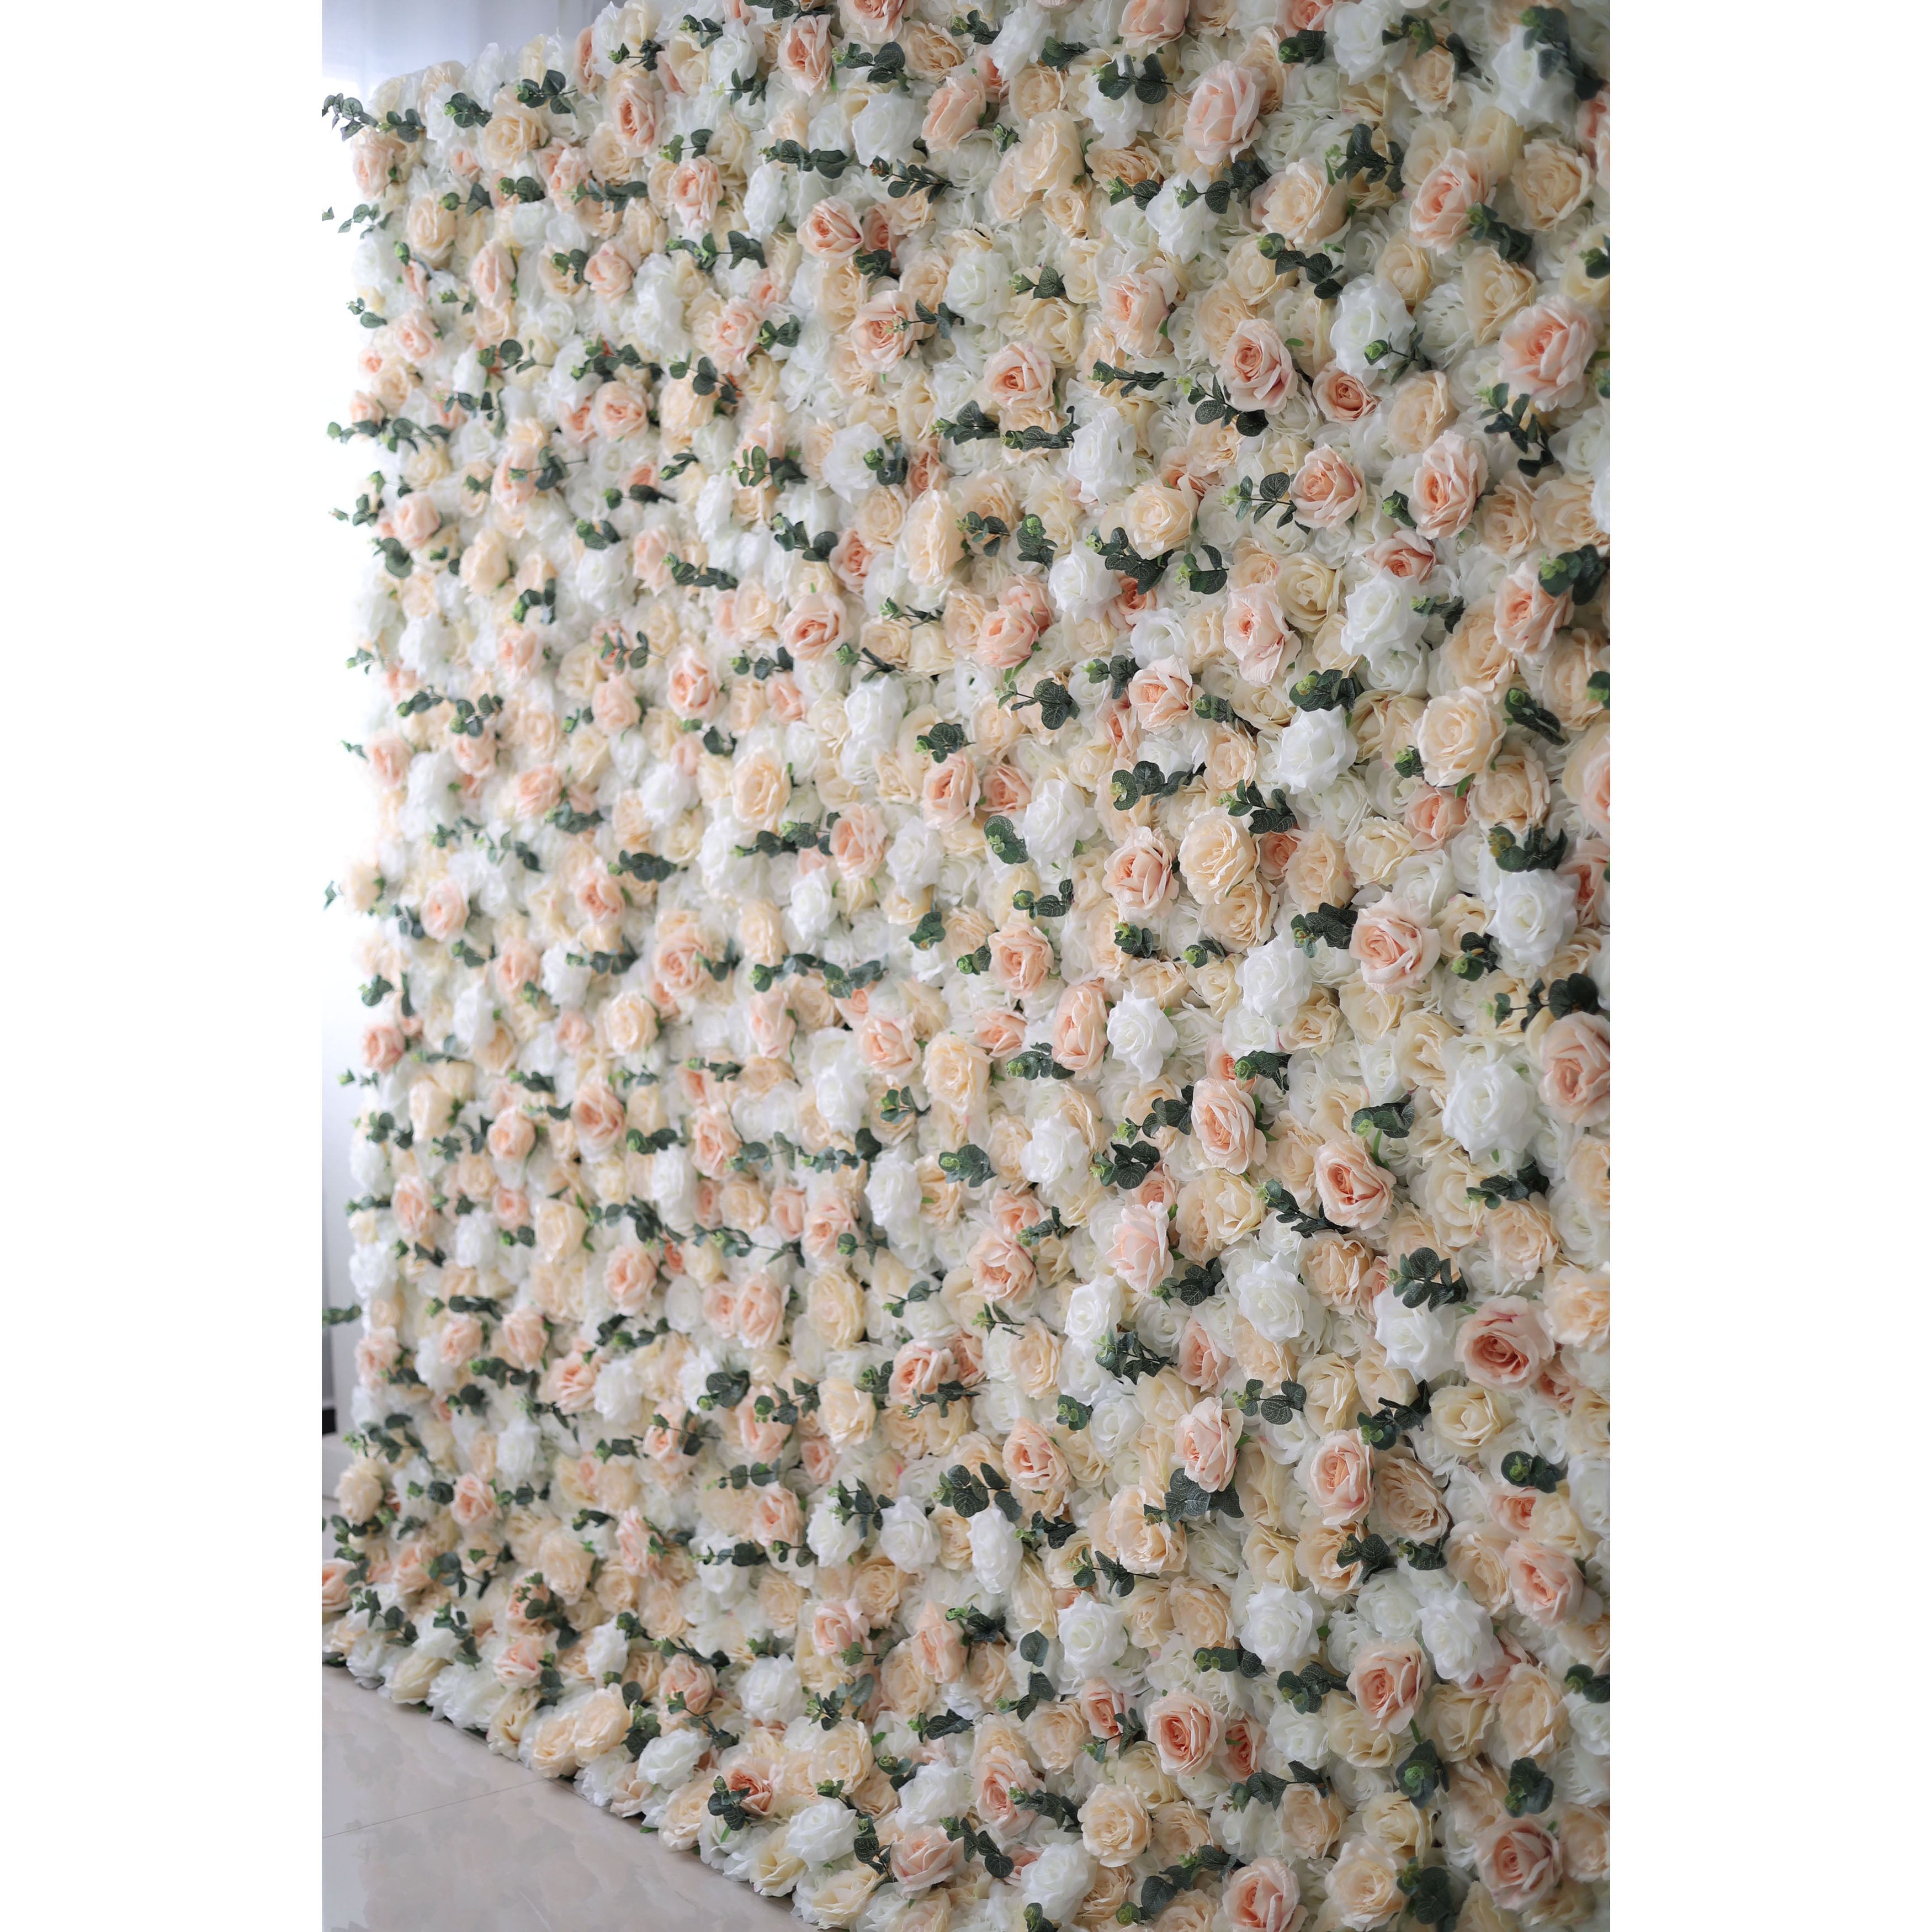 Valar Flowers artificial white and rose fog flower wall backdrop made of fabric for wedding and event decor, perfect for photography0